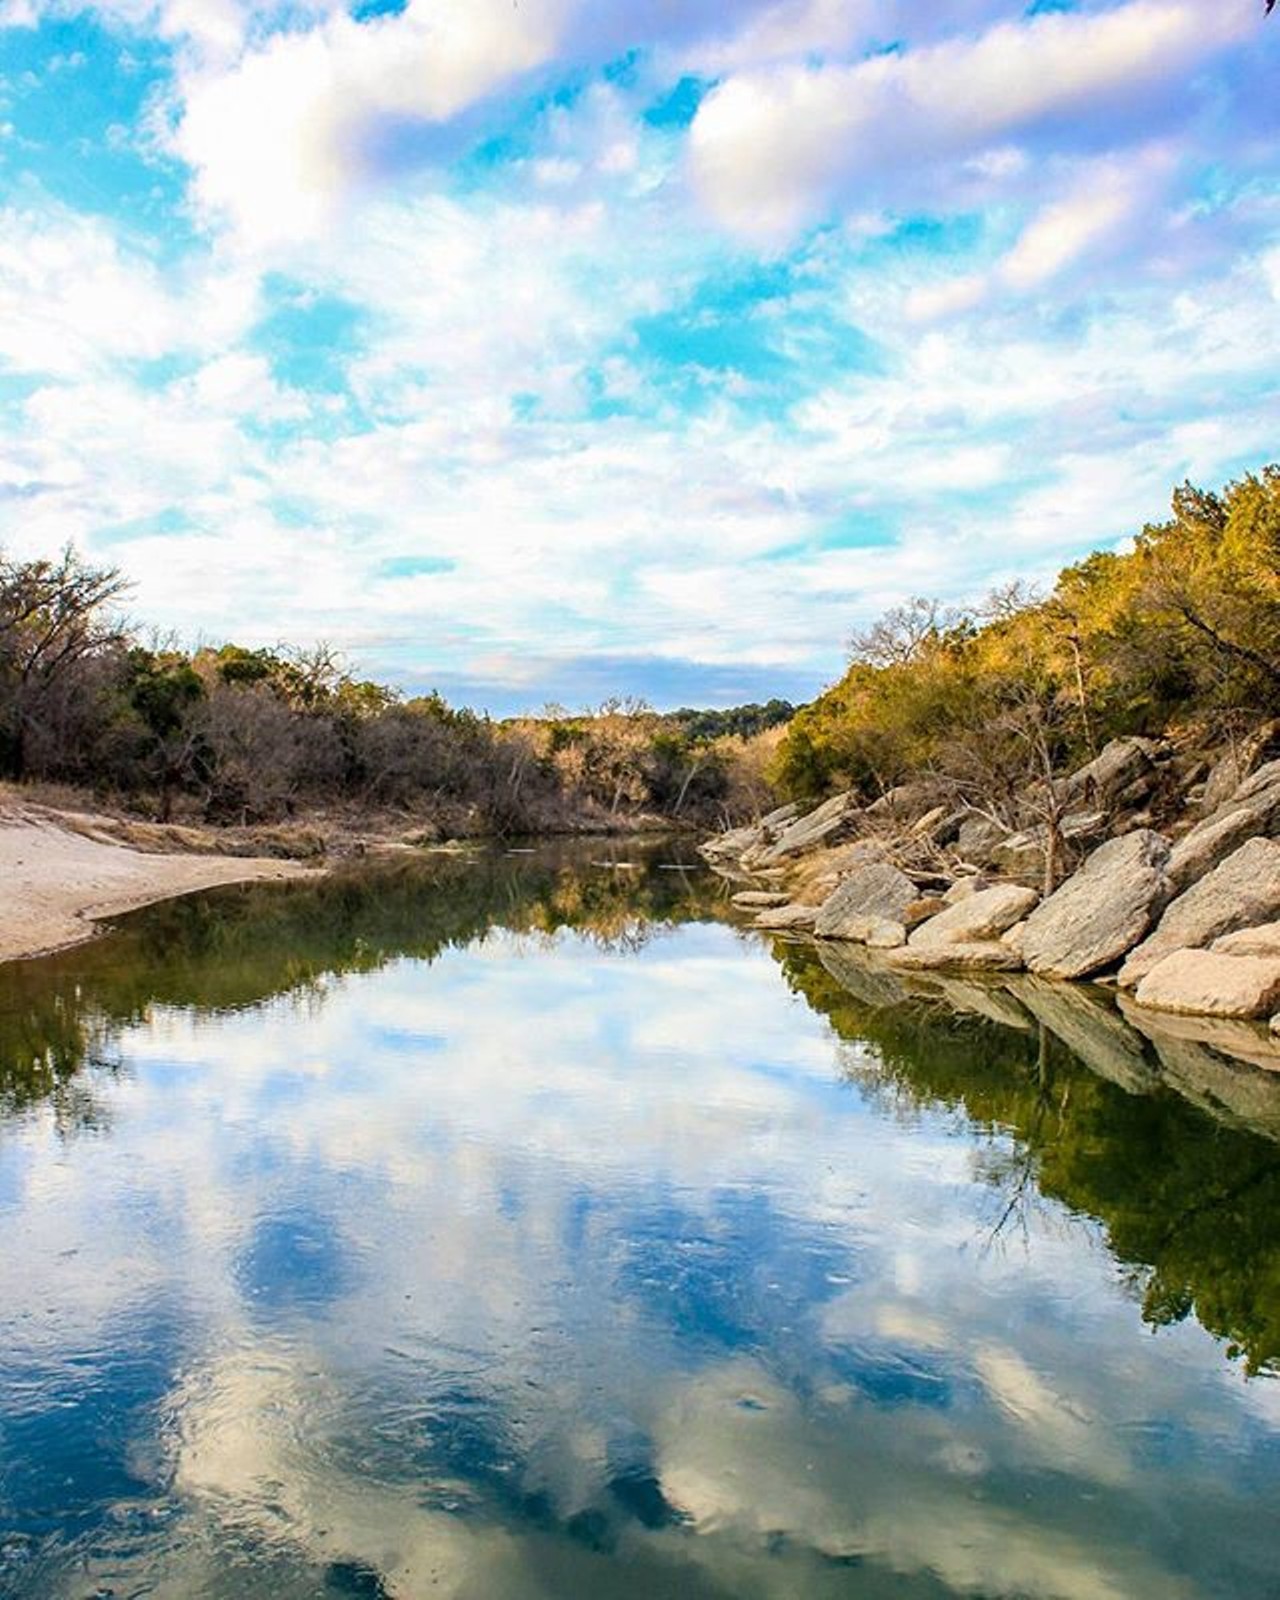 Dinosaur Valley
A place where dinosaurs once roamed, Dinosaur Valley keeps true to its name. Hike in dinosaur tracks along Paluxy River, bike or swim at the 20 miles of state park. The park is about 4 hours away and makes for a great camping trip. 
http://bit.ly/1RiJiTA
Photo via Rlmegan/Instagram